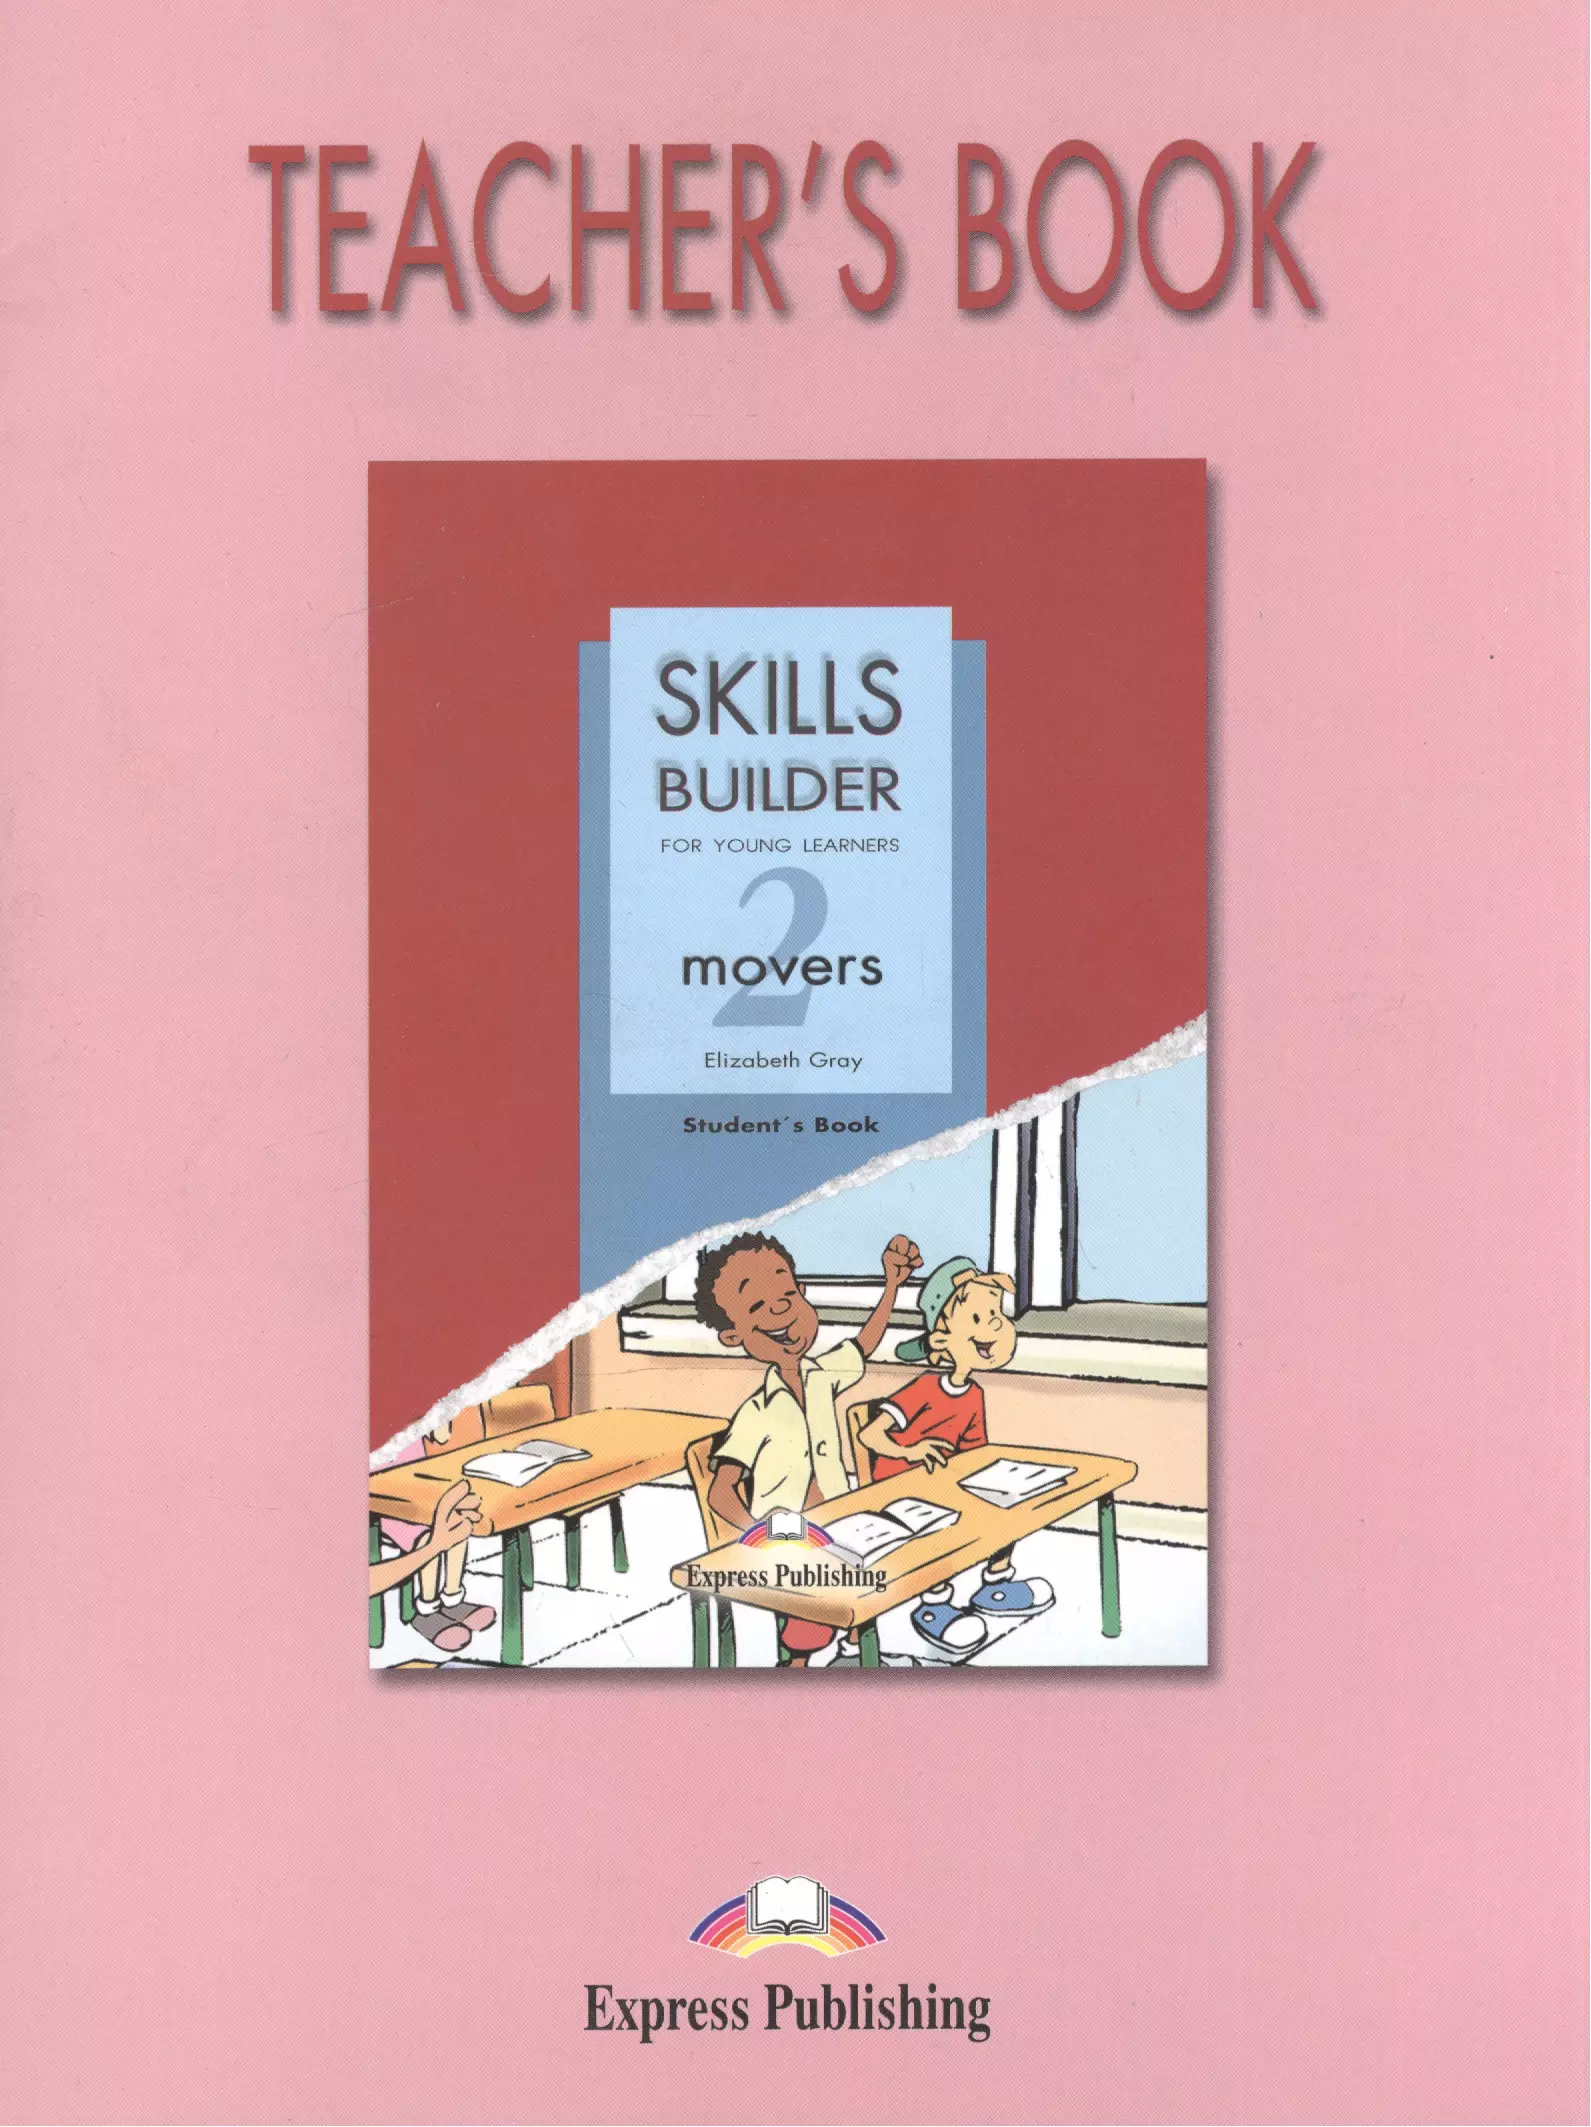 Gray Elizabeth - Skills Builder for Young Learning Movers 2. Teacher's Book